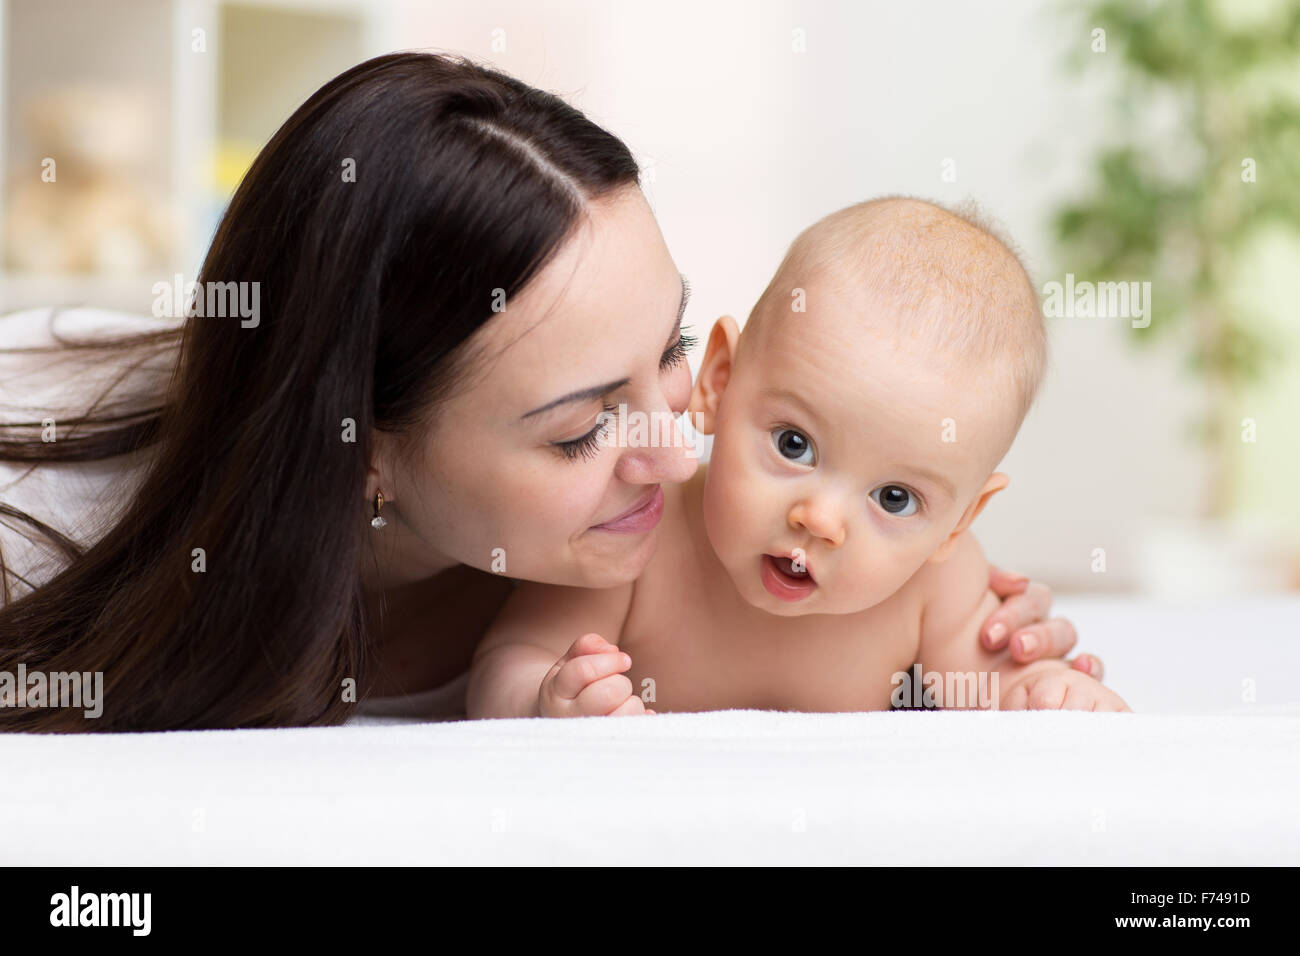 happy mother hugging and kissing her baby Stock Photo